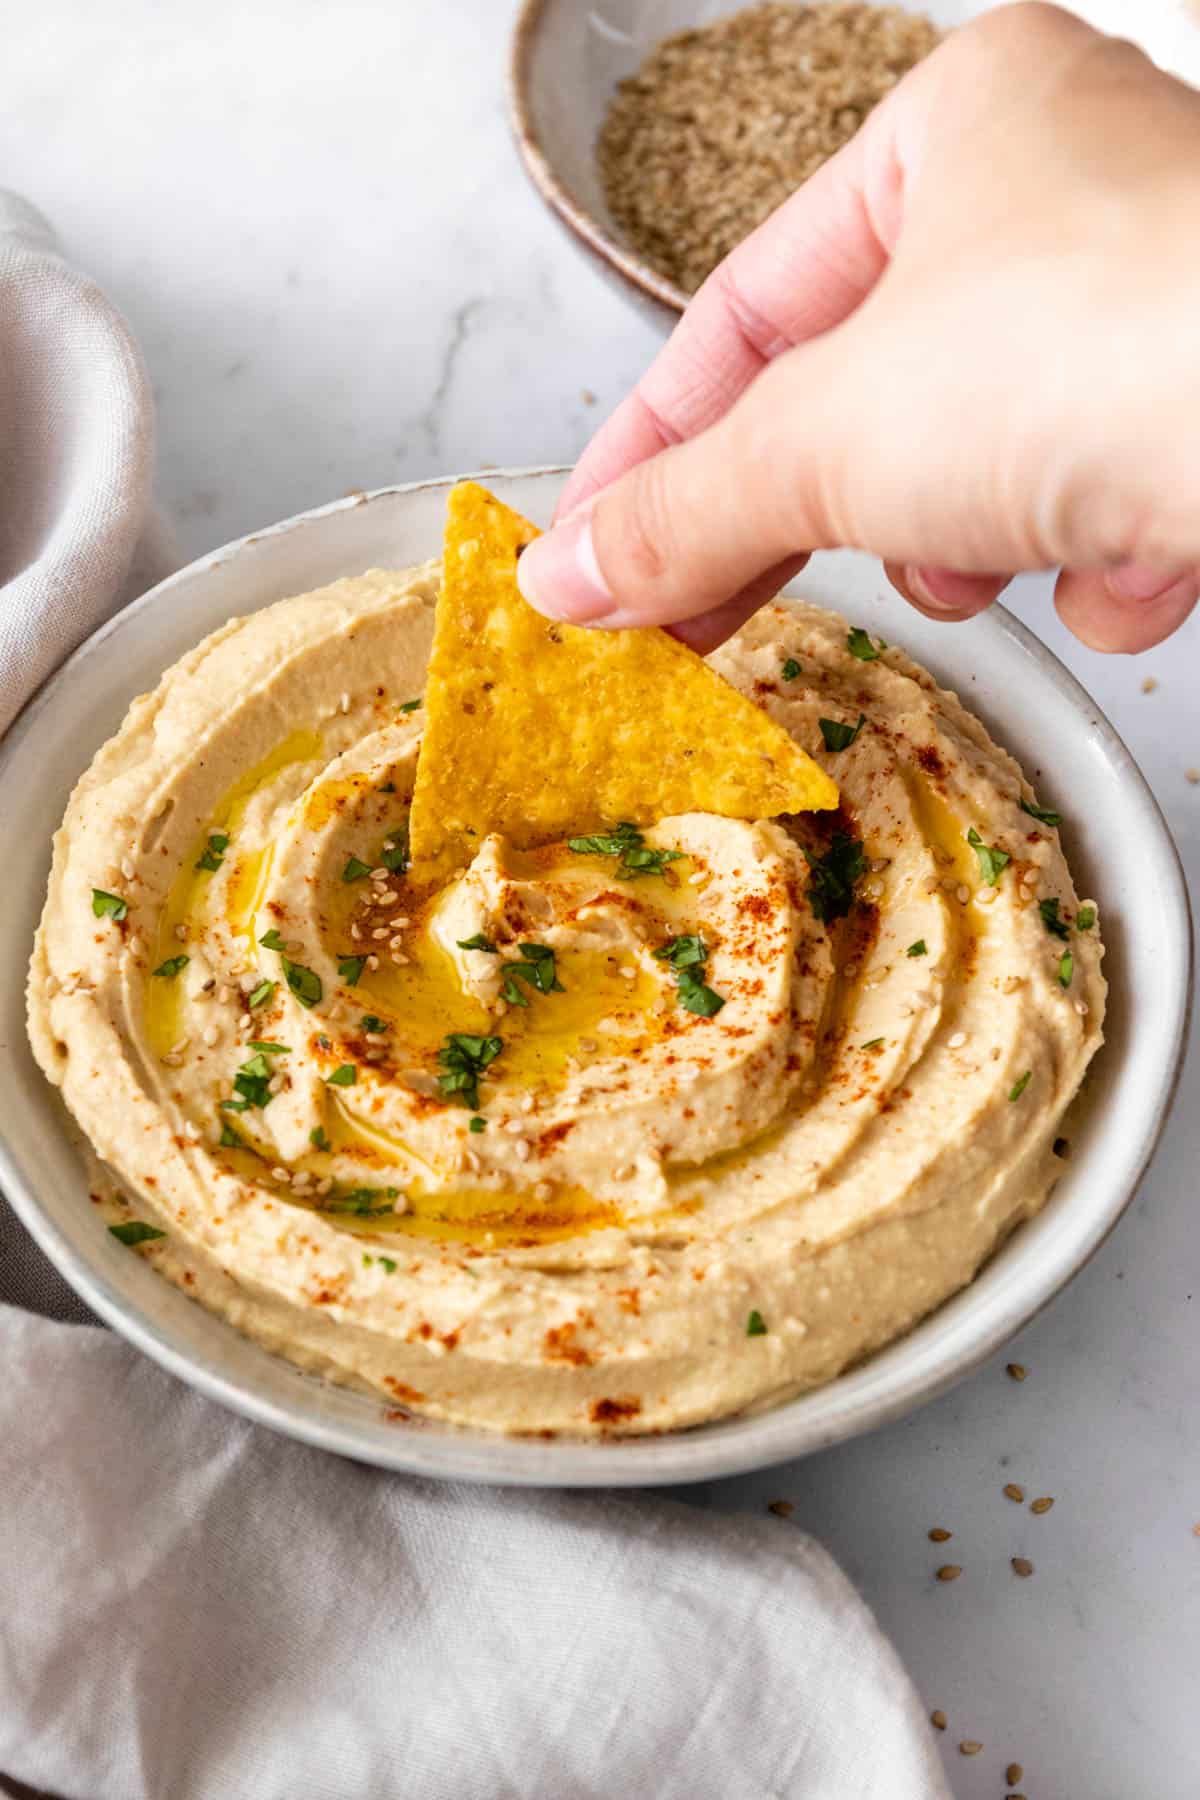 a hand dipping a chip into the hummus